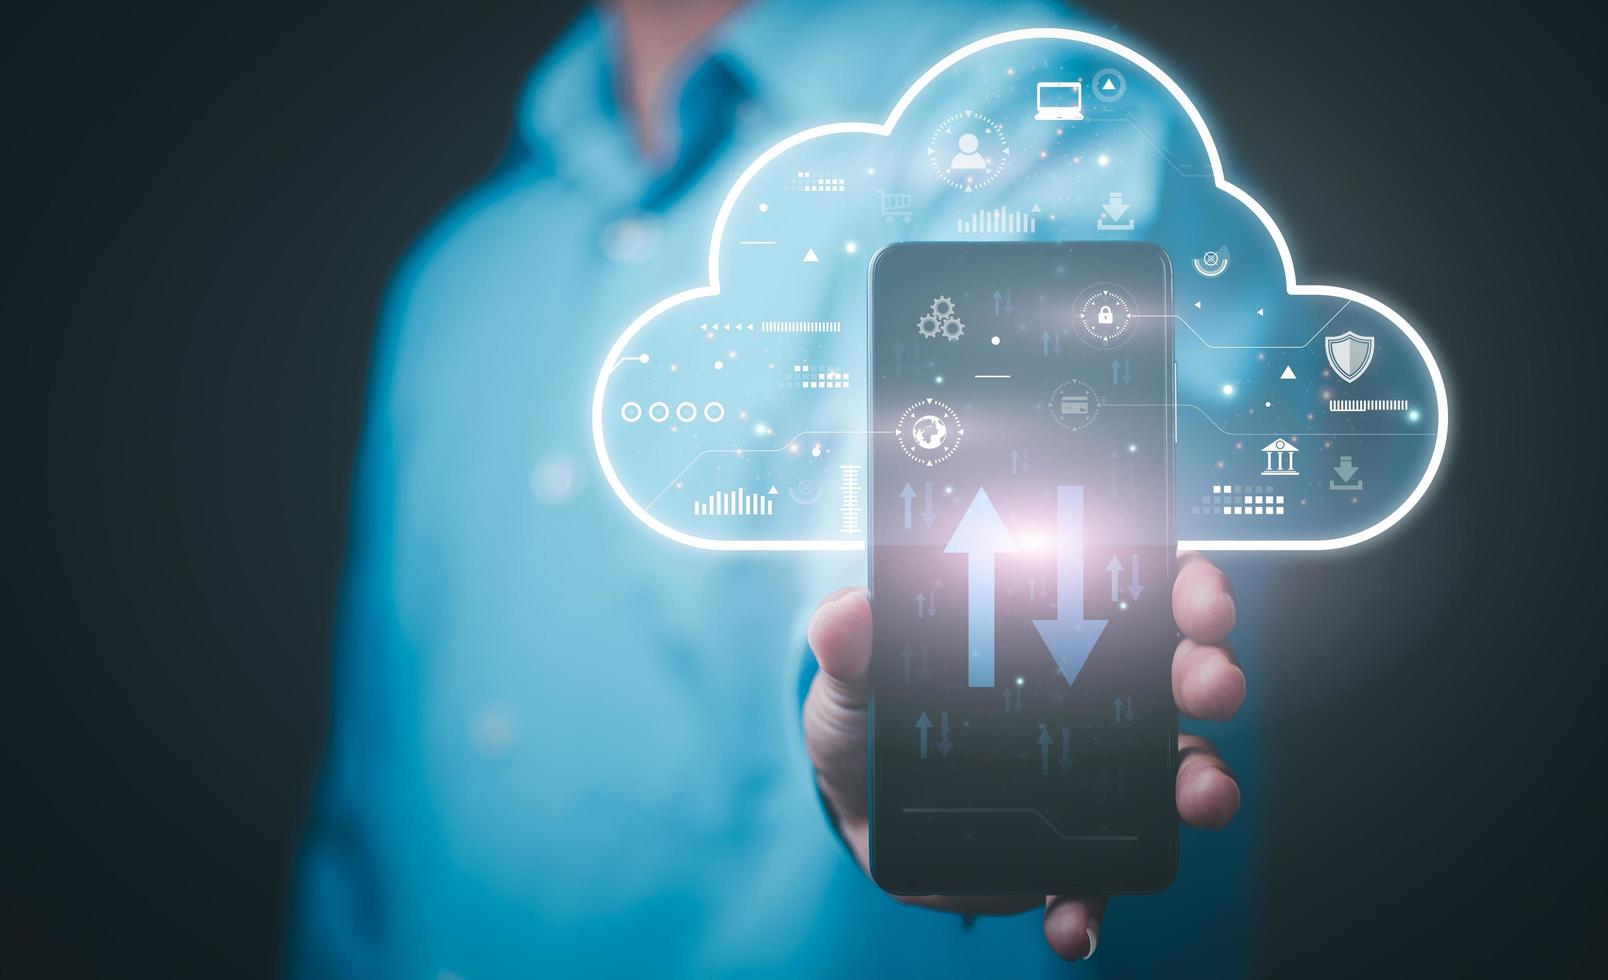 The smartphone in the hands of a young businessman uses cloud network technology to communicate and connect to data servers around the world. with online internet innovation photo